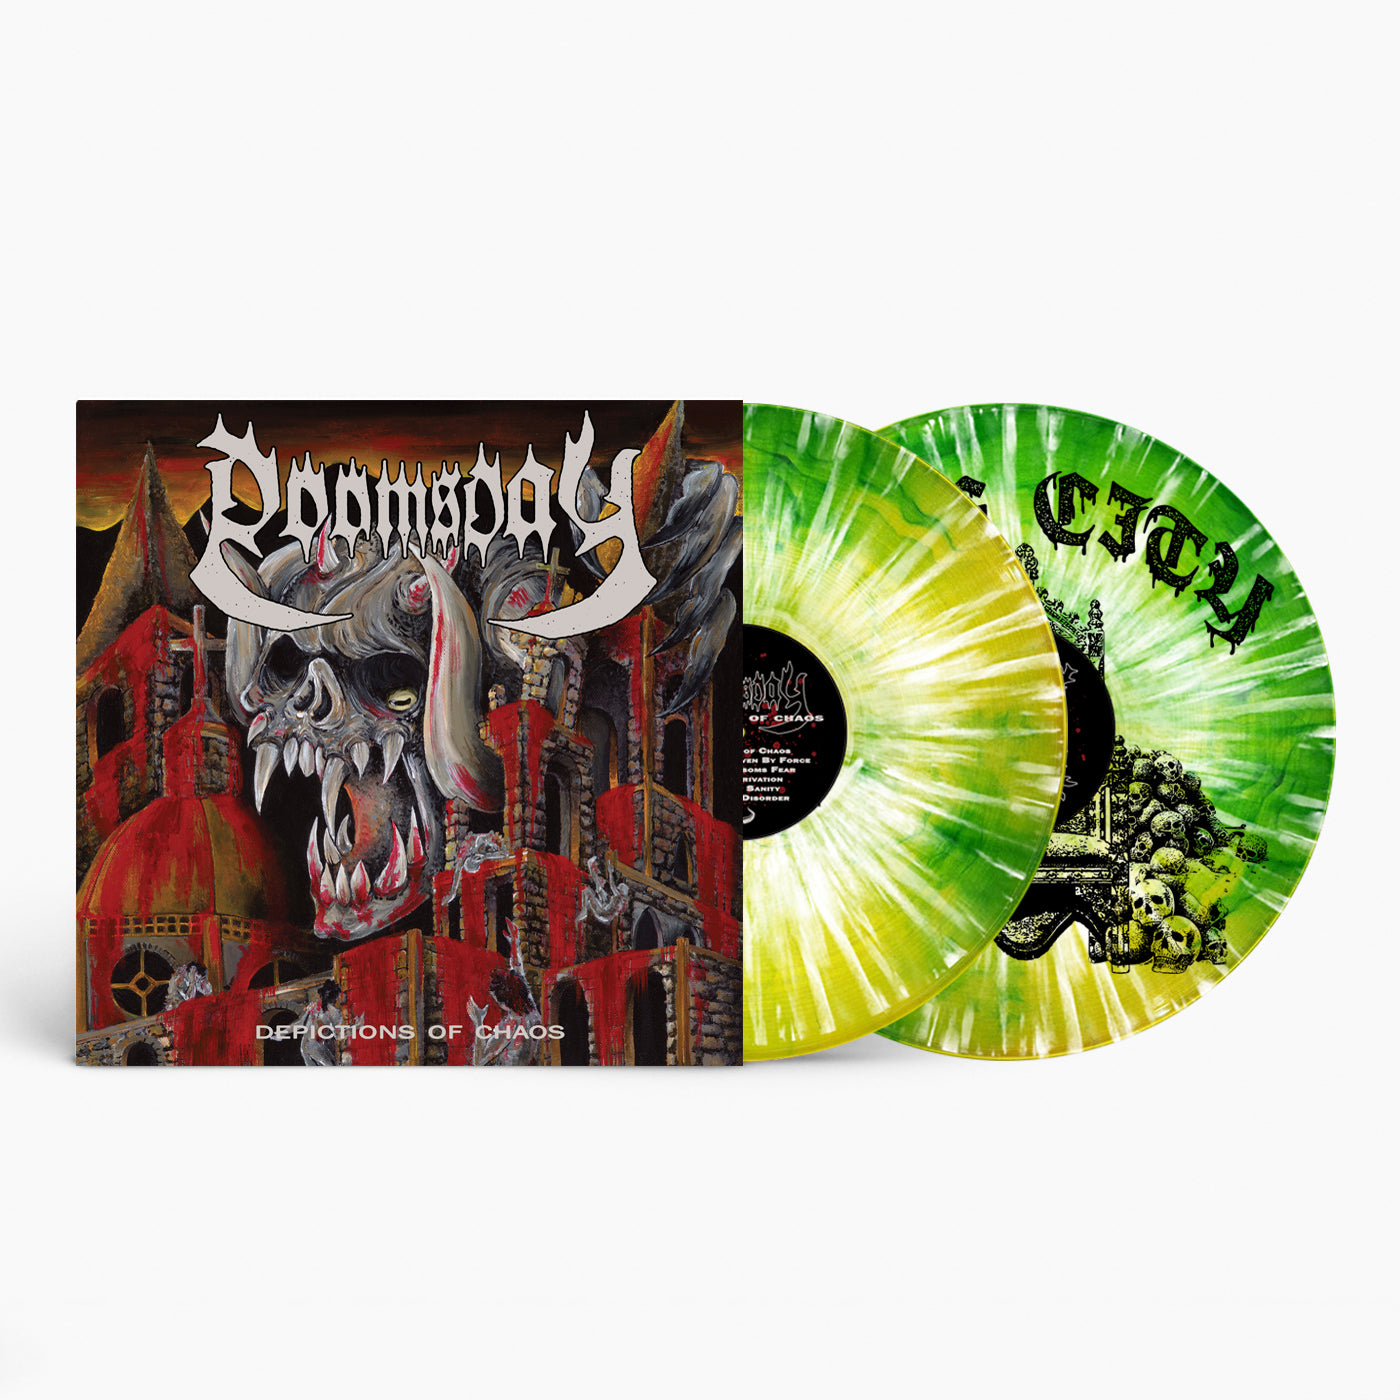 DOOMSDAY "Depictions of Chaos" 12" EP (Oakland A's Variant)